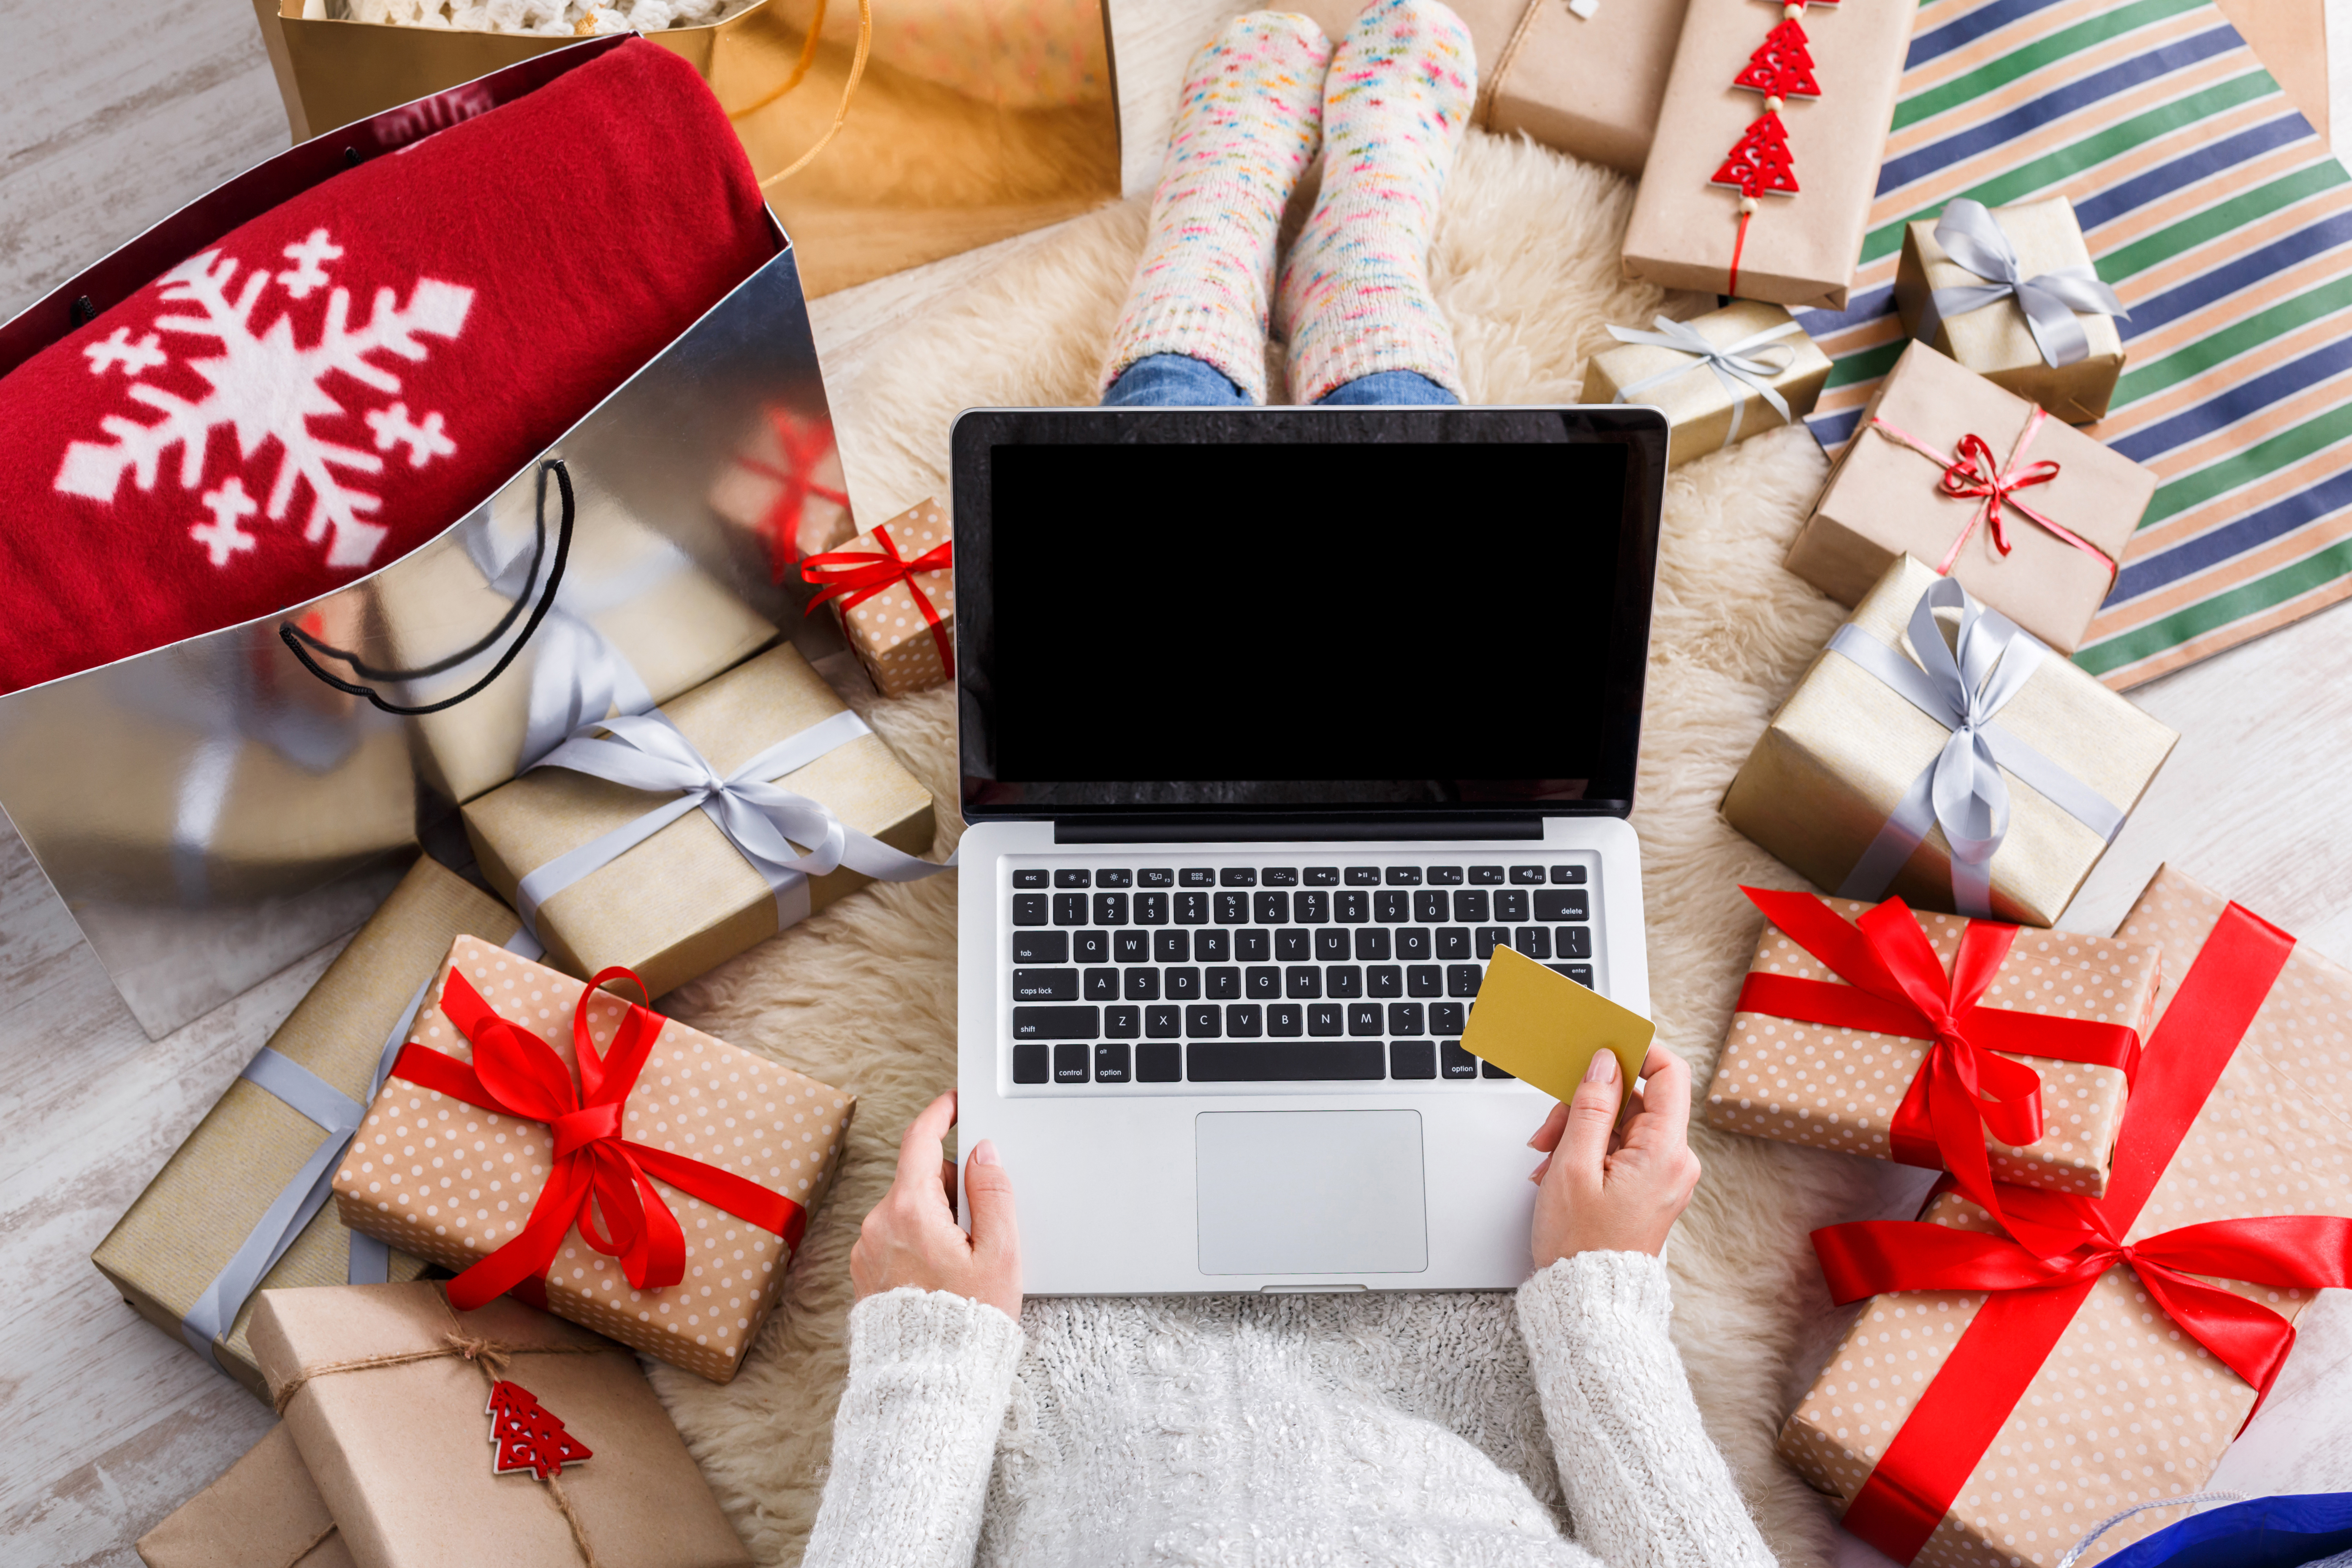 The 5 Mistakes to Avoid During the Holiday Season